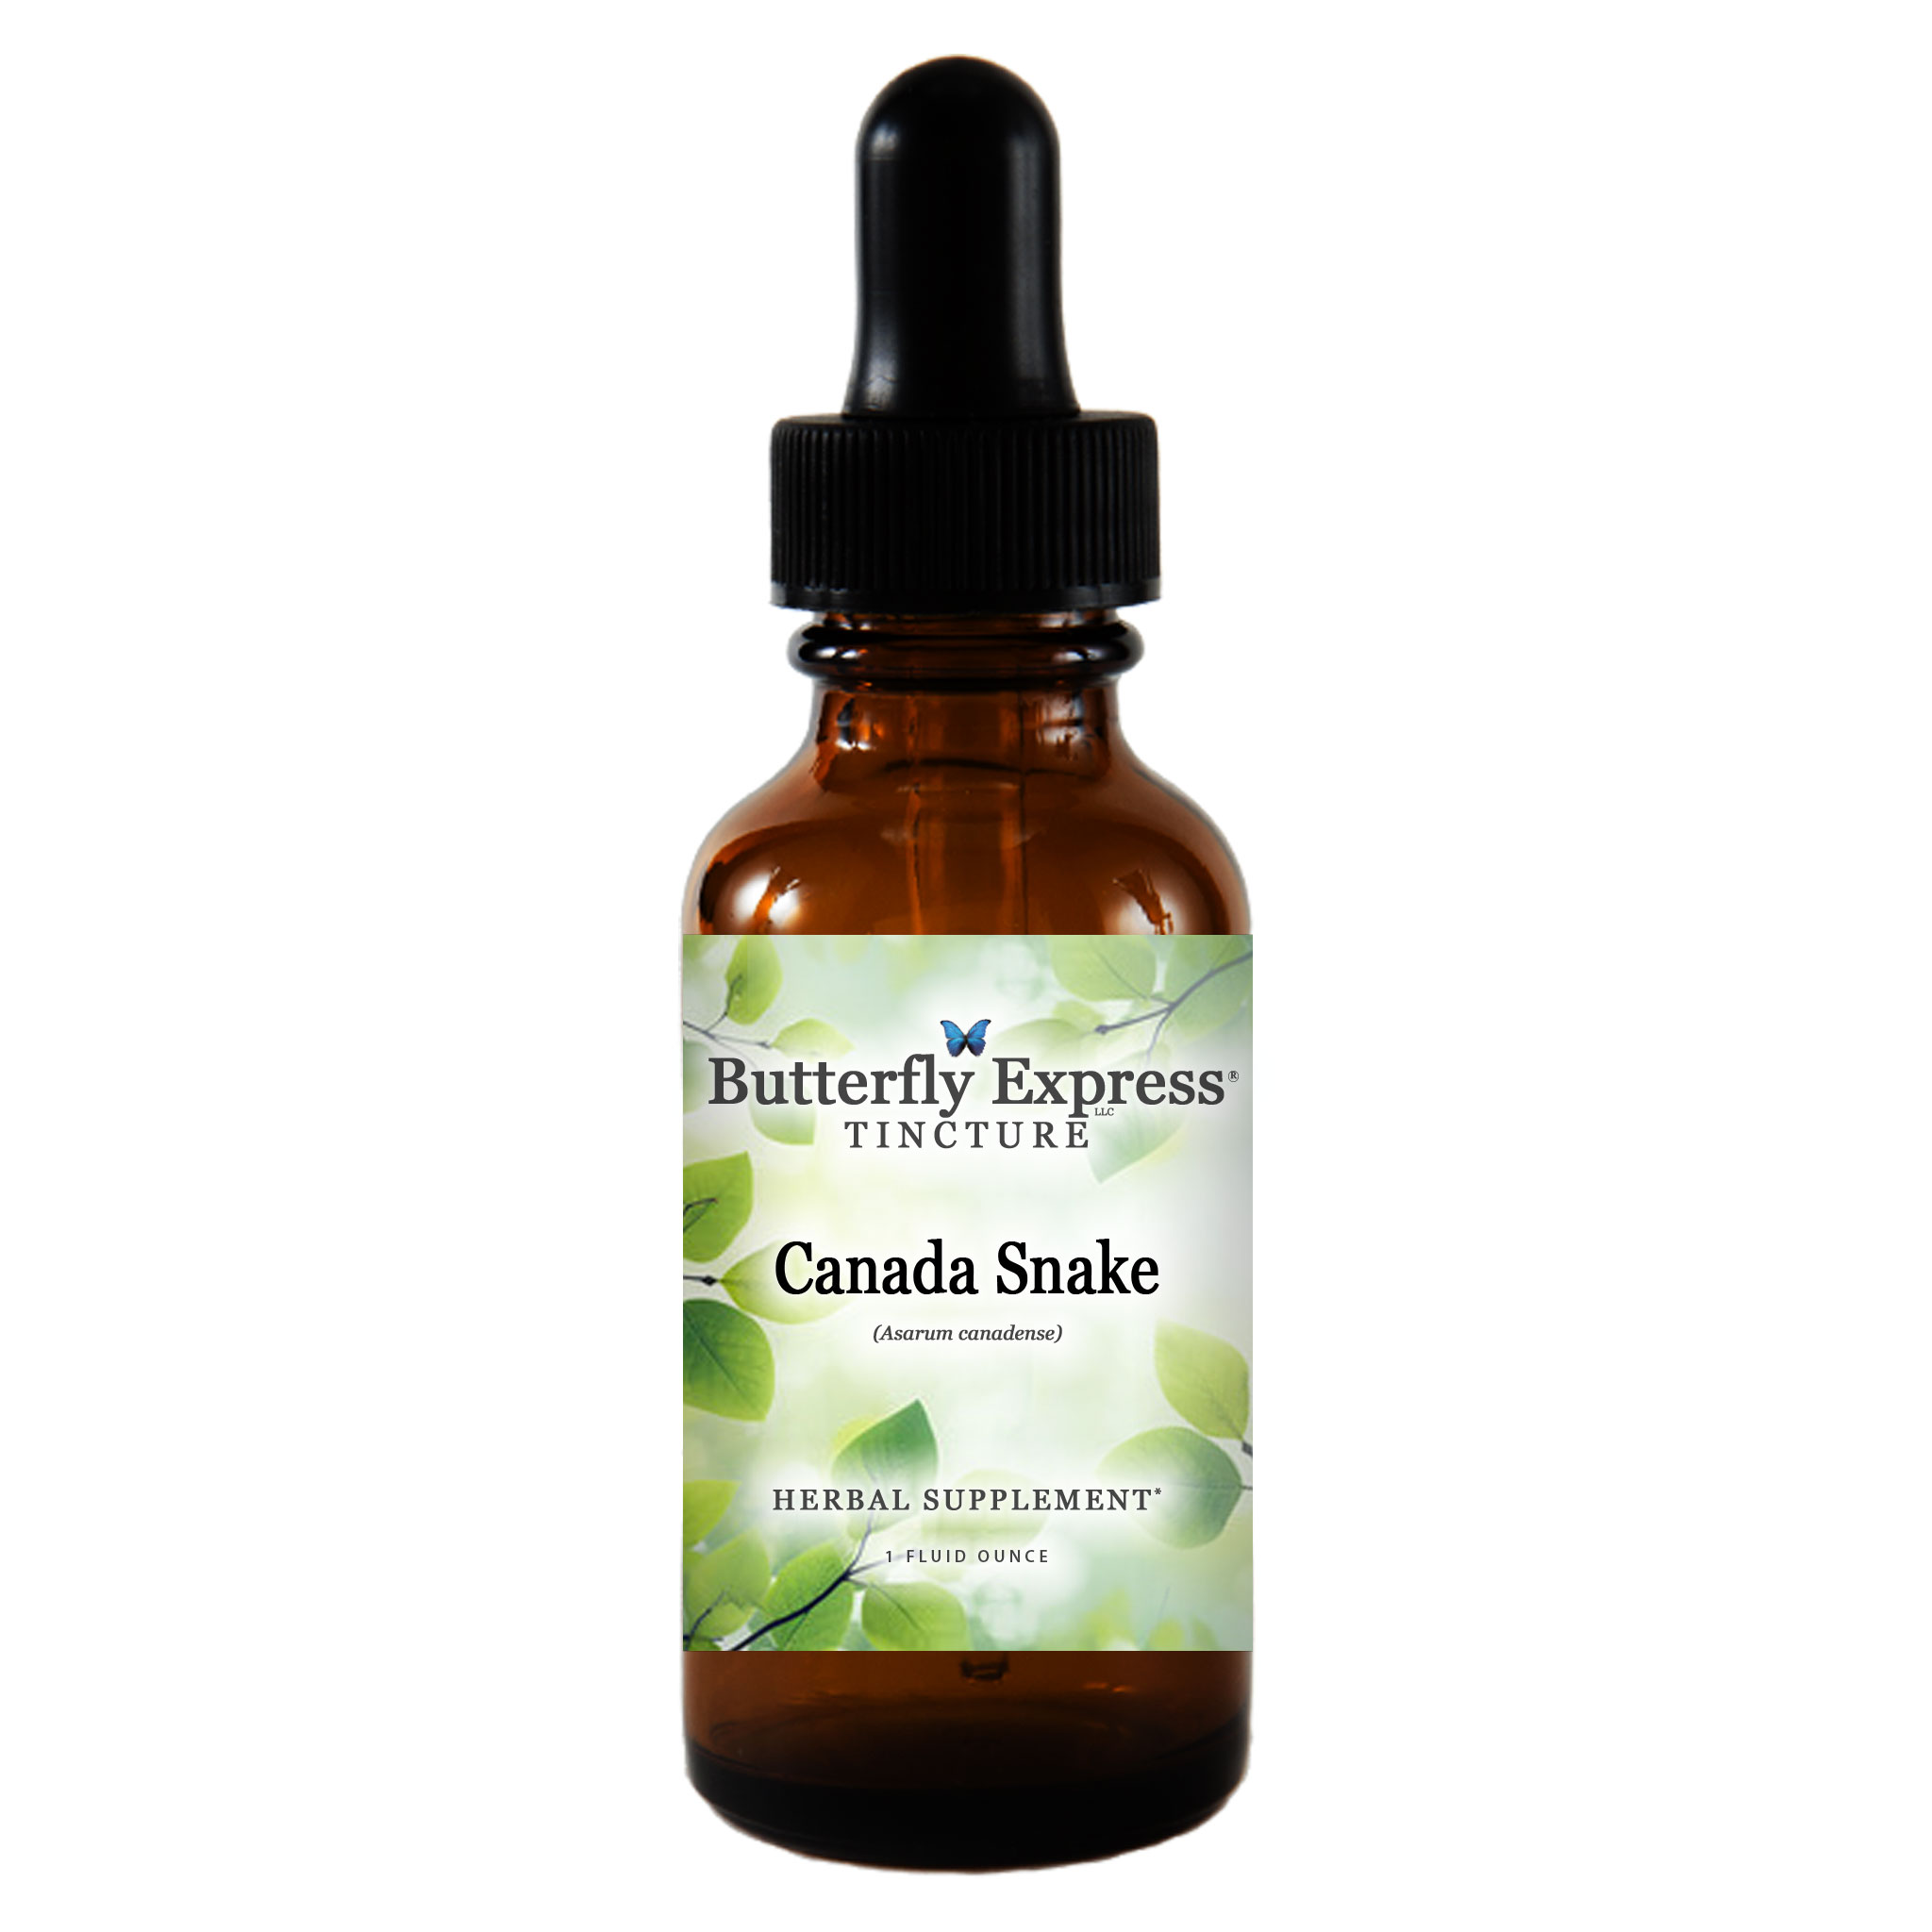 Canada Snake Tincture